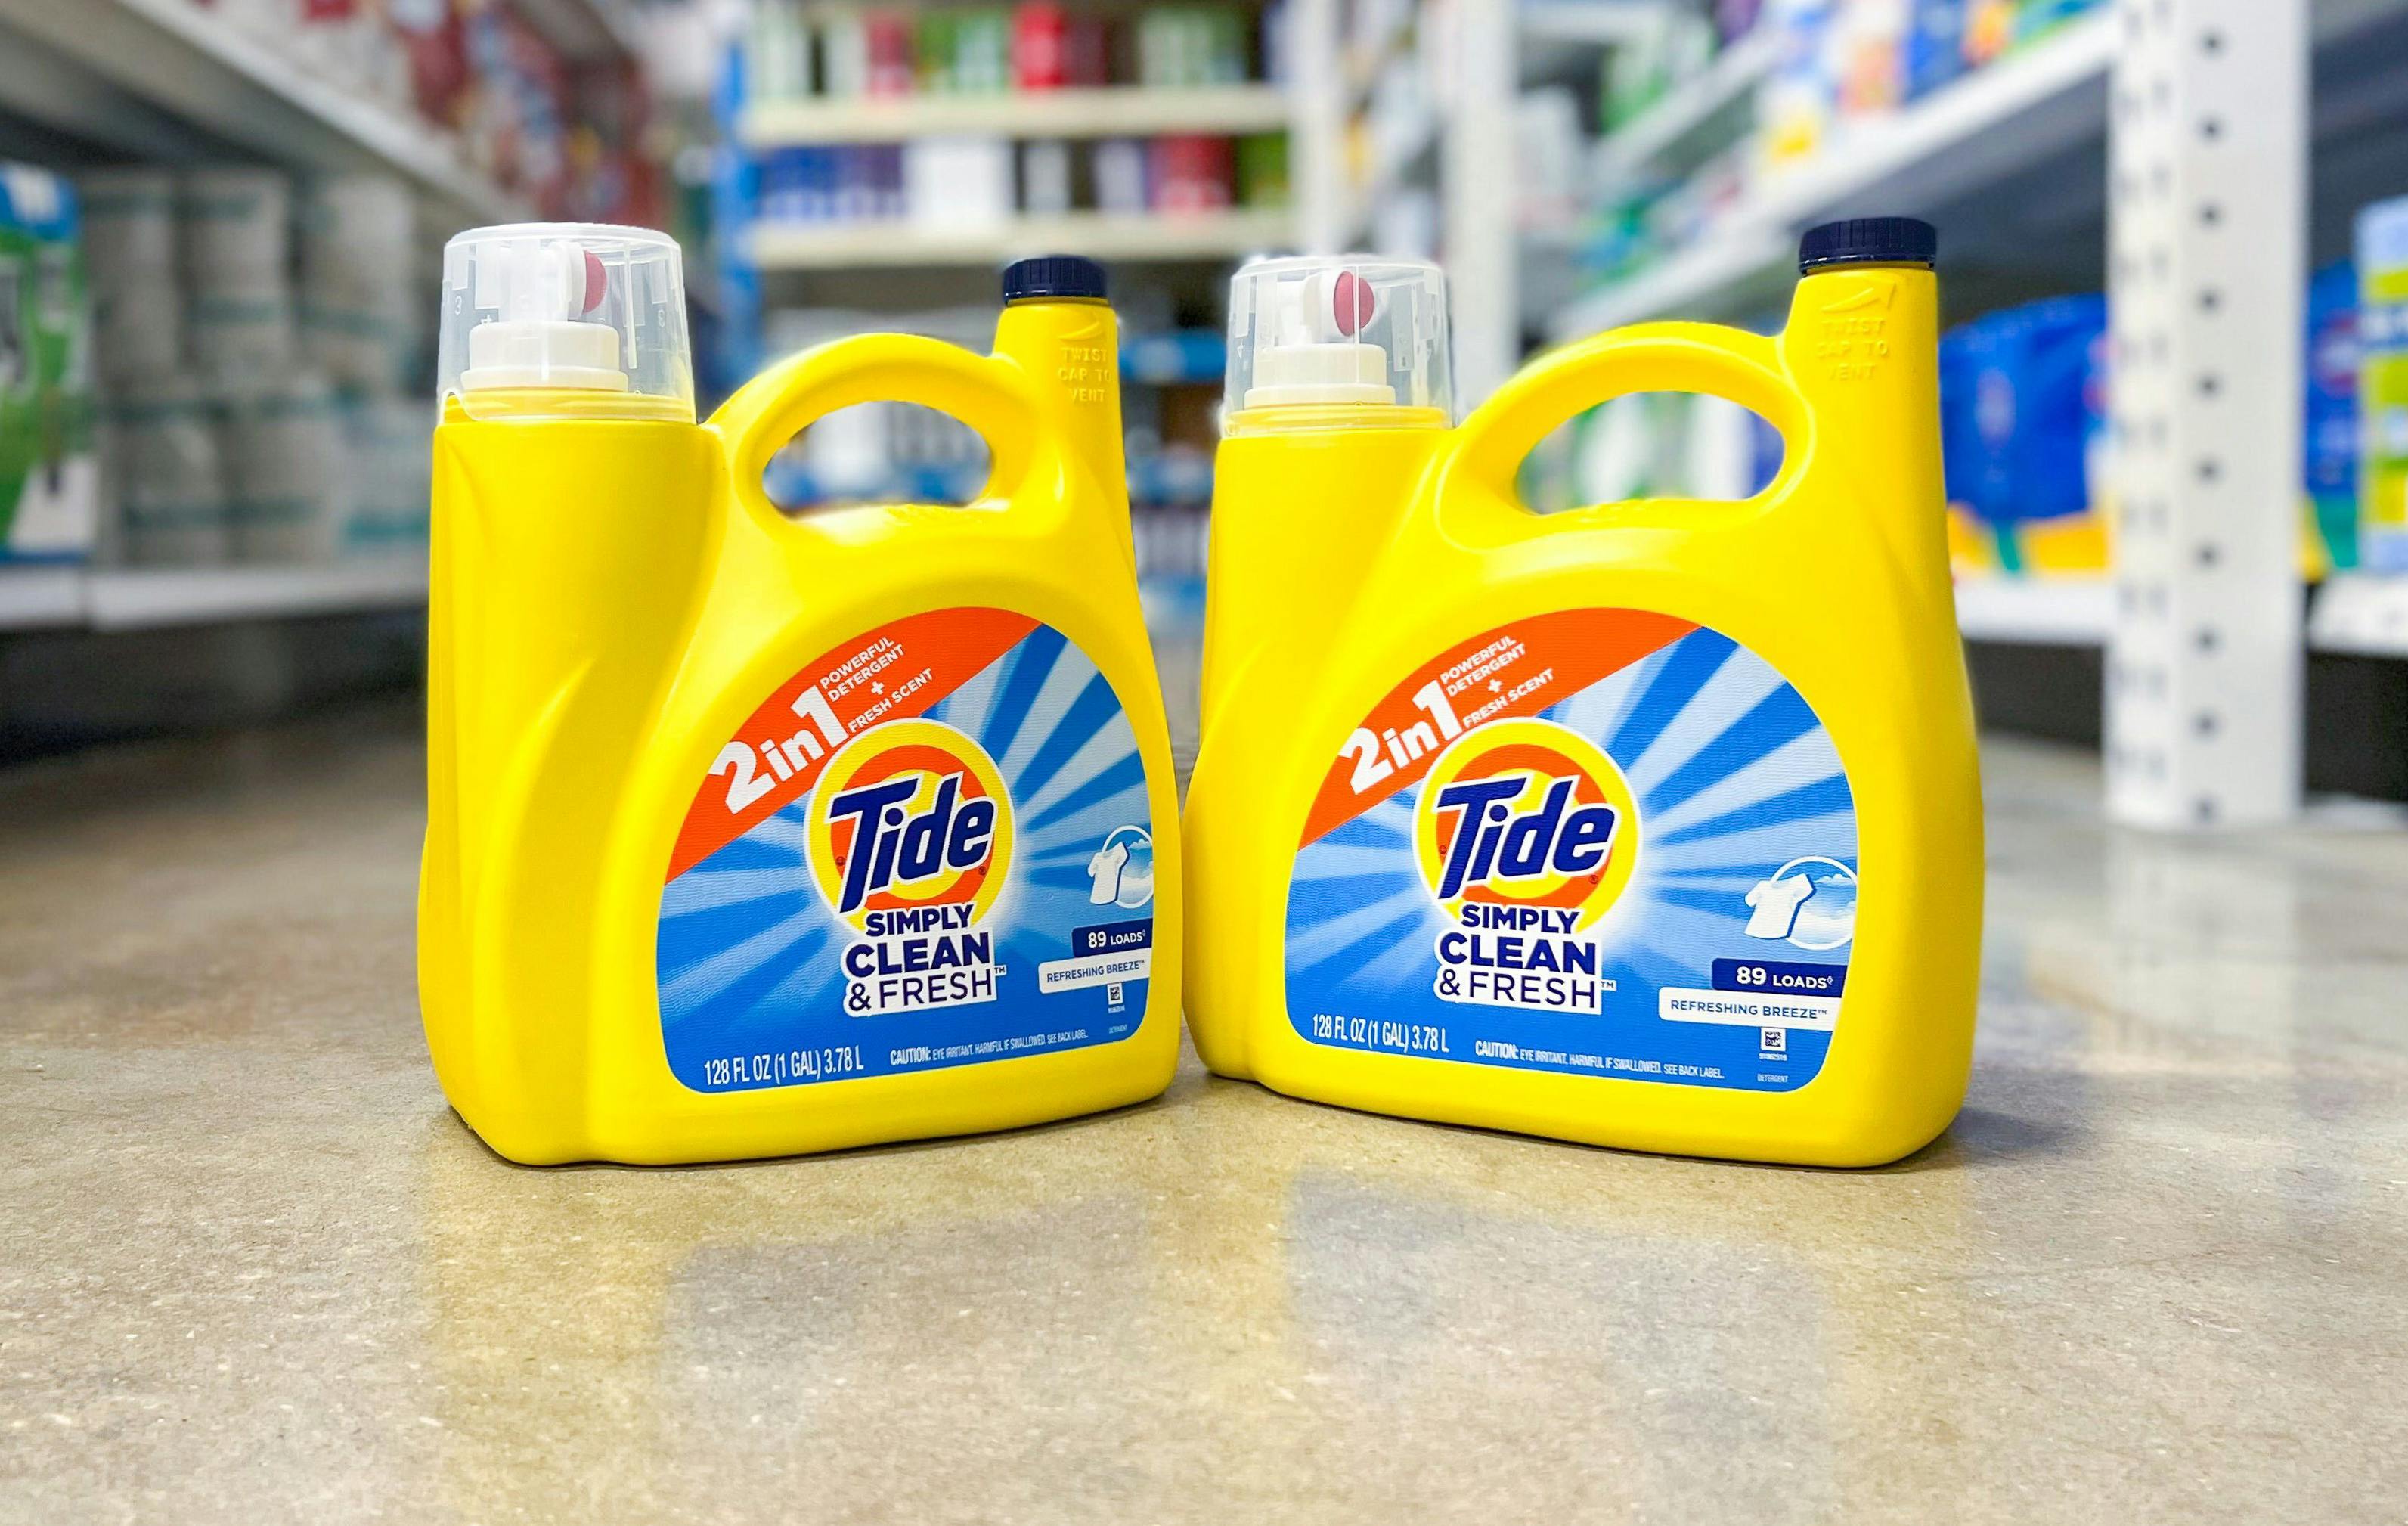 two large bottles of tide simply laundry detergent on a floor in a store